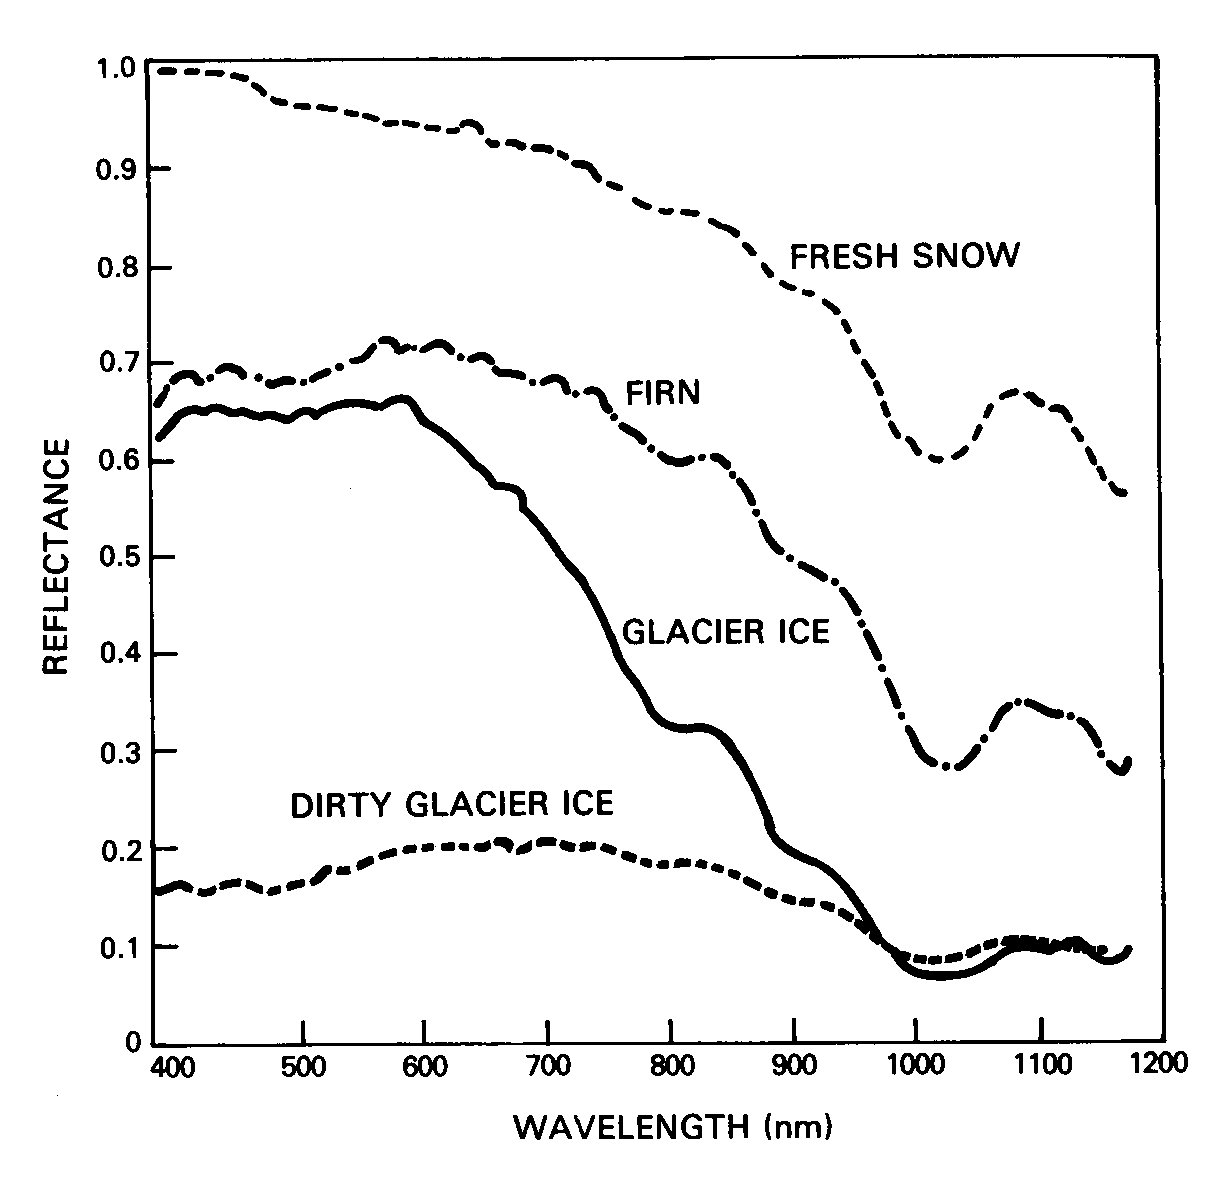 Figure 1. Reflectance spectra for different snow and ice surfaces (Hall et al., 1985)